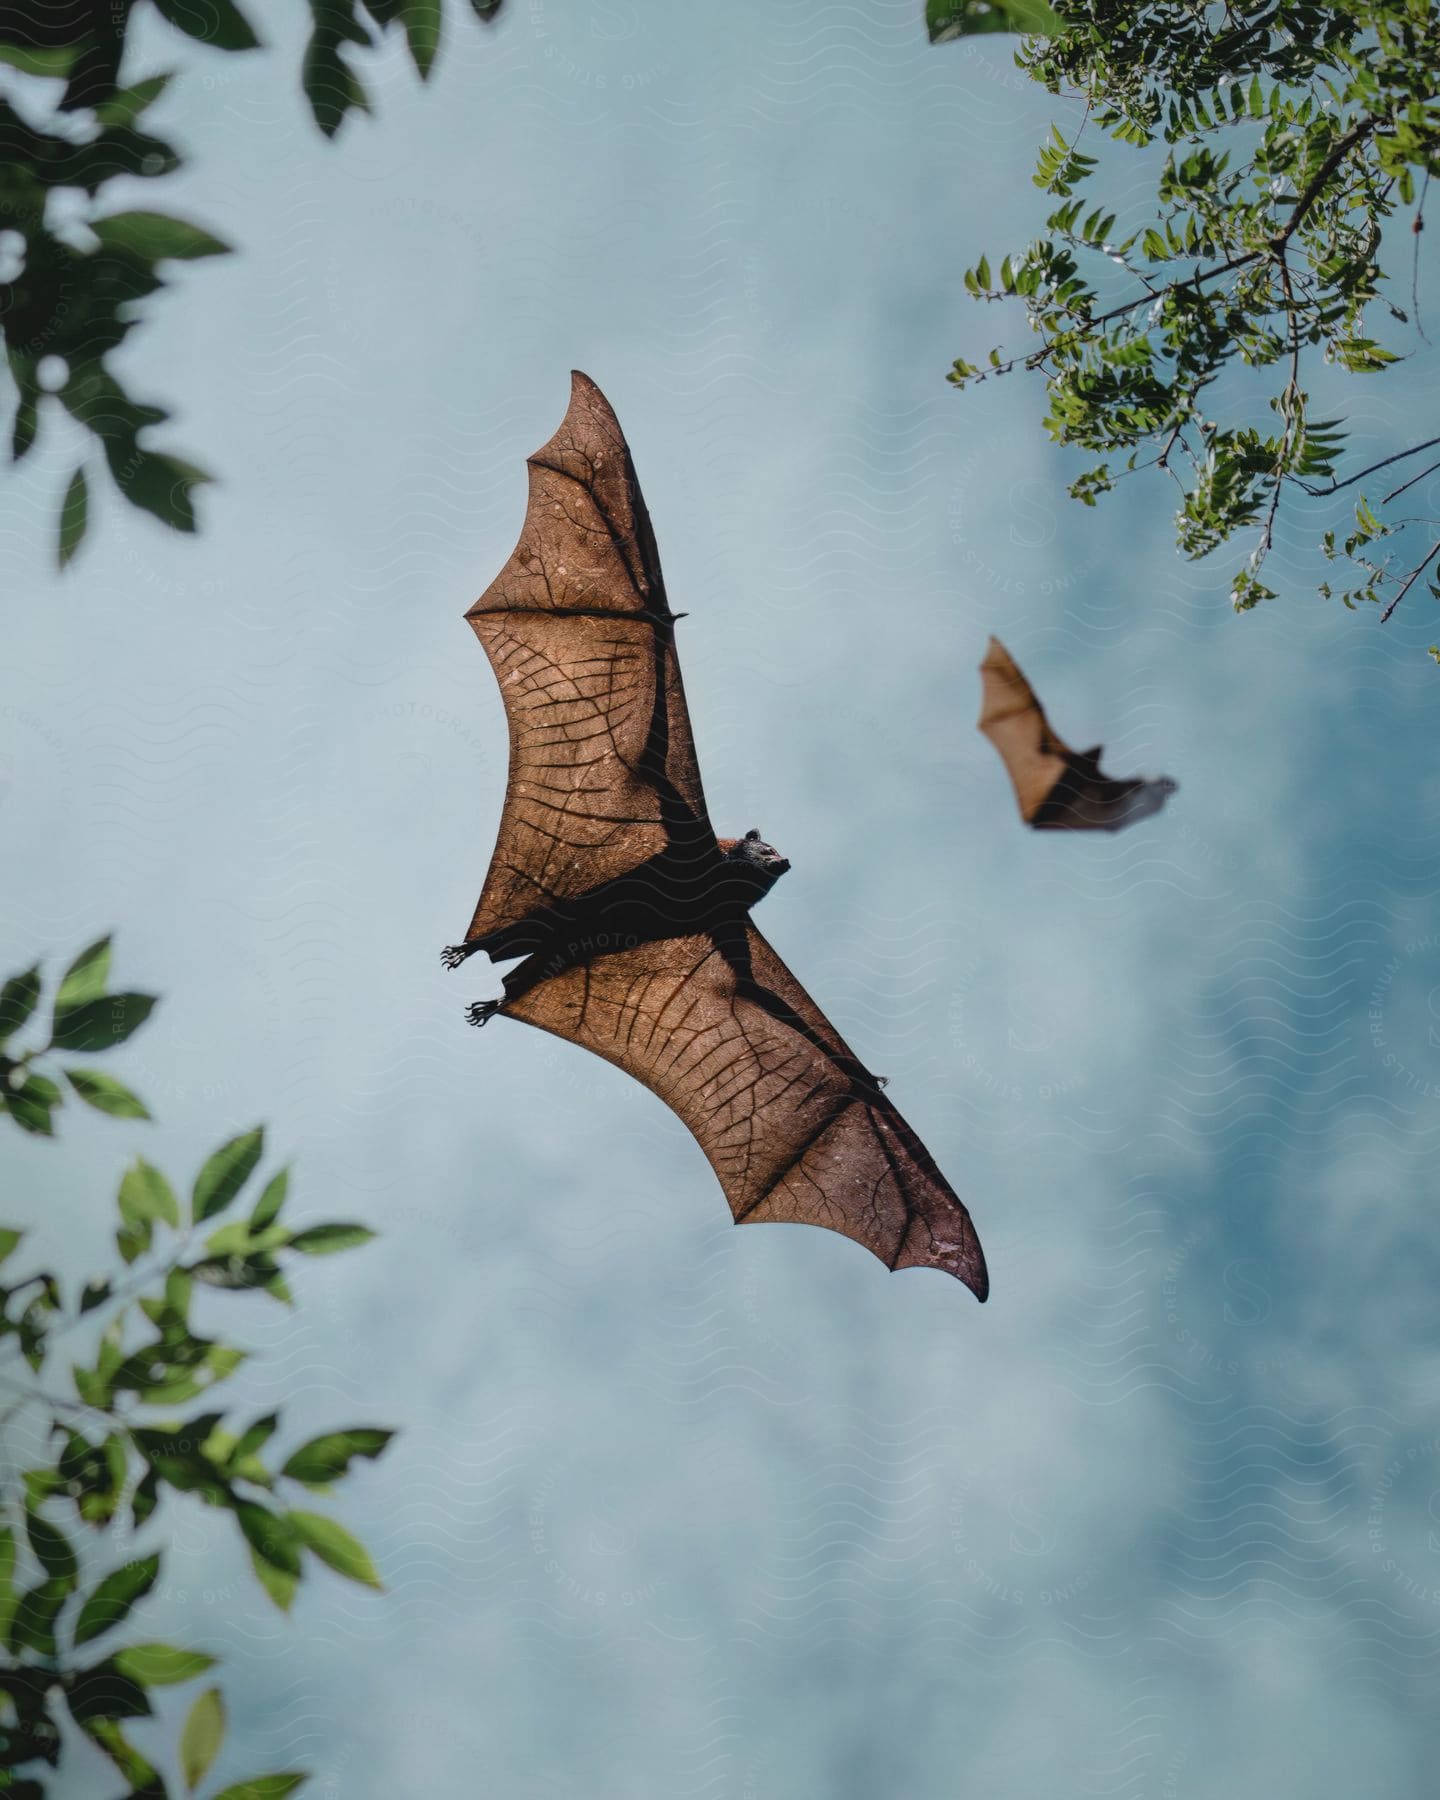 Stock photo of two bats fly against a clear blue sky, framed by green leaves.